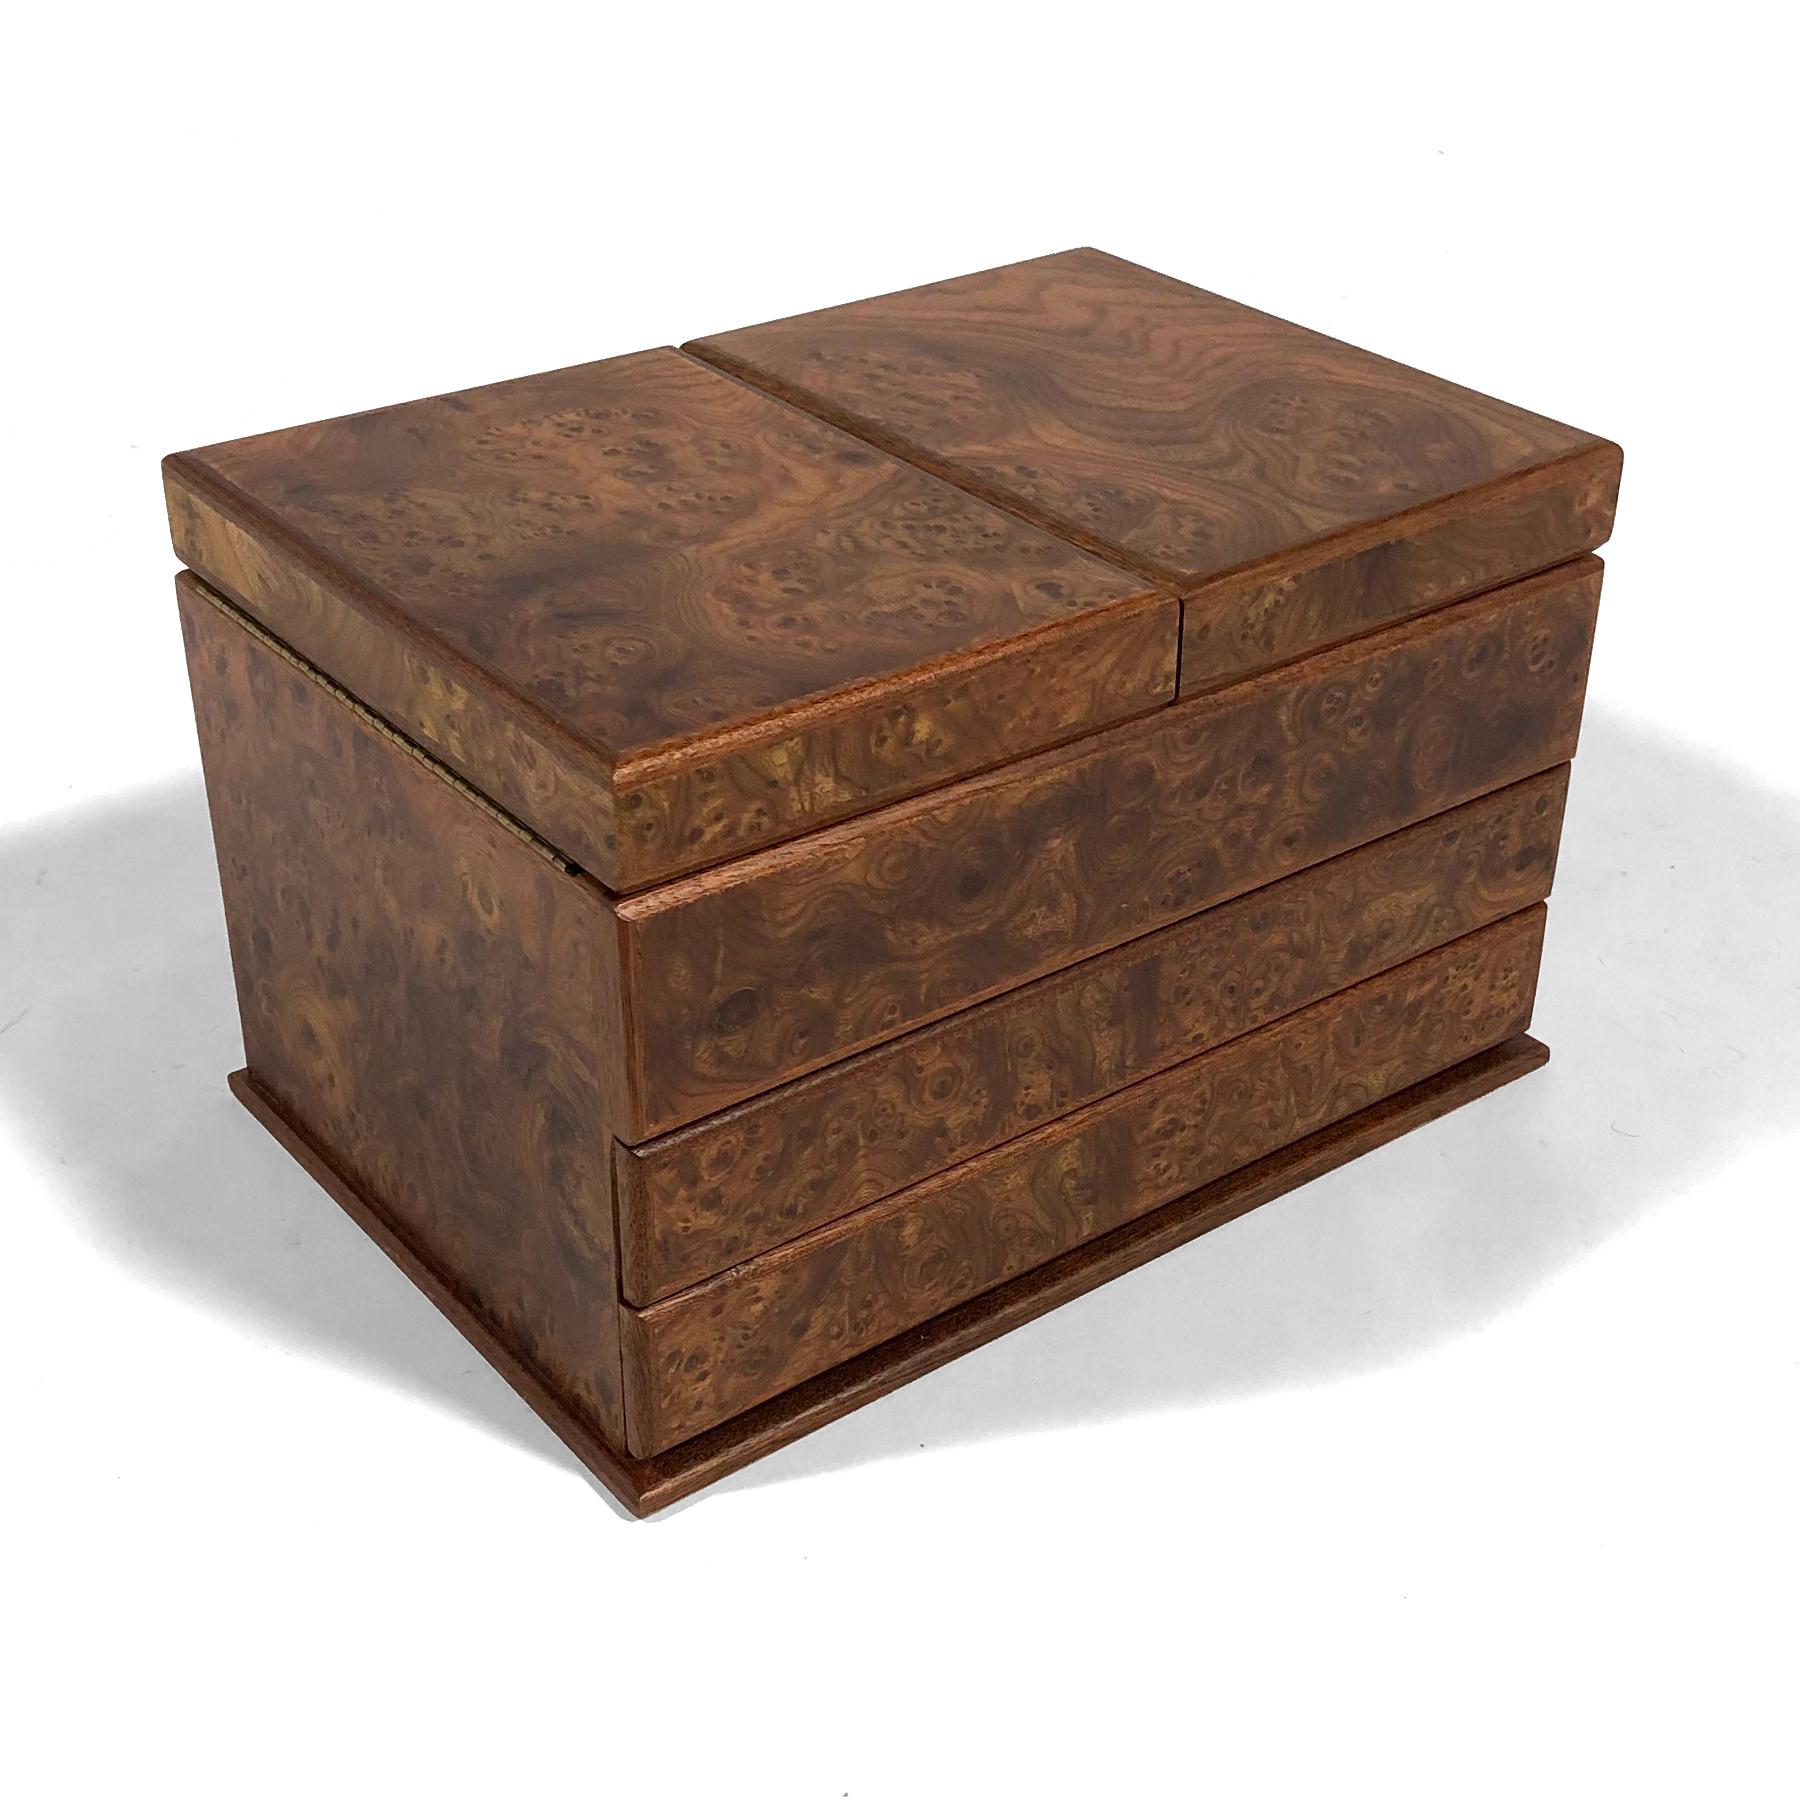 This stately chest made in Italy by Agresti is clad in beautifully figured elm brair can accommodate 18 watches on holders and laying down.